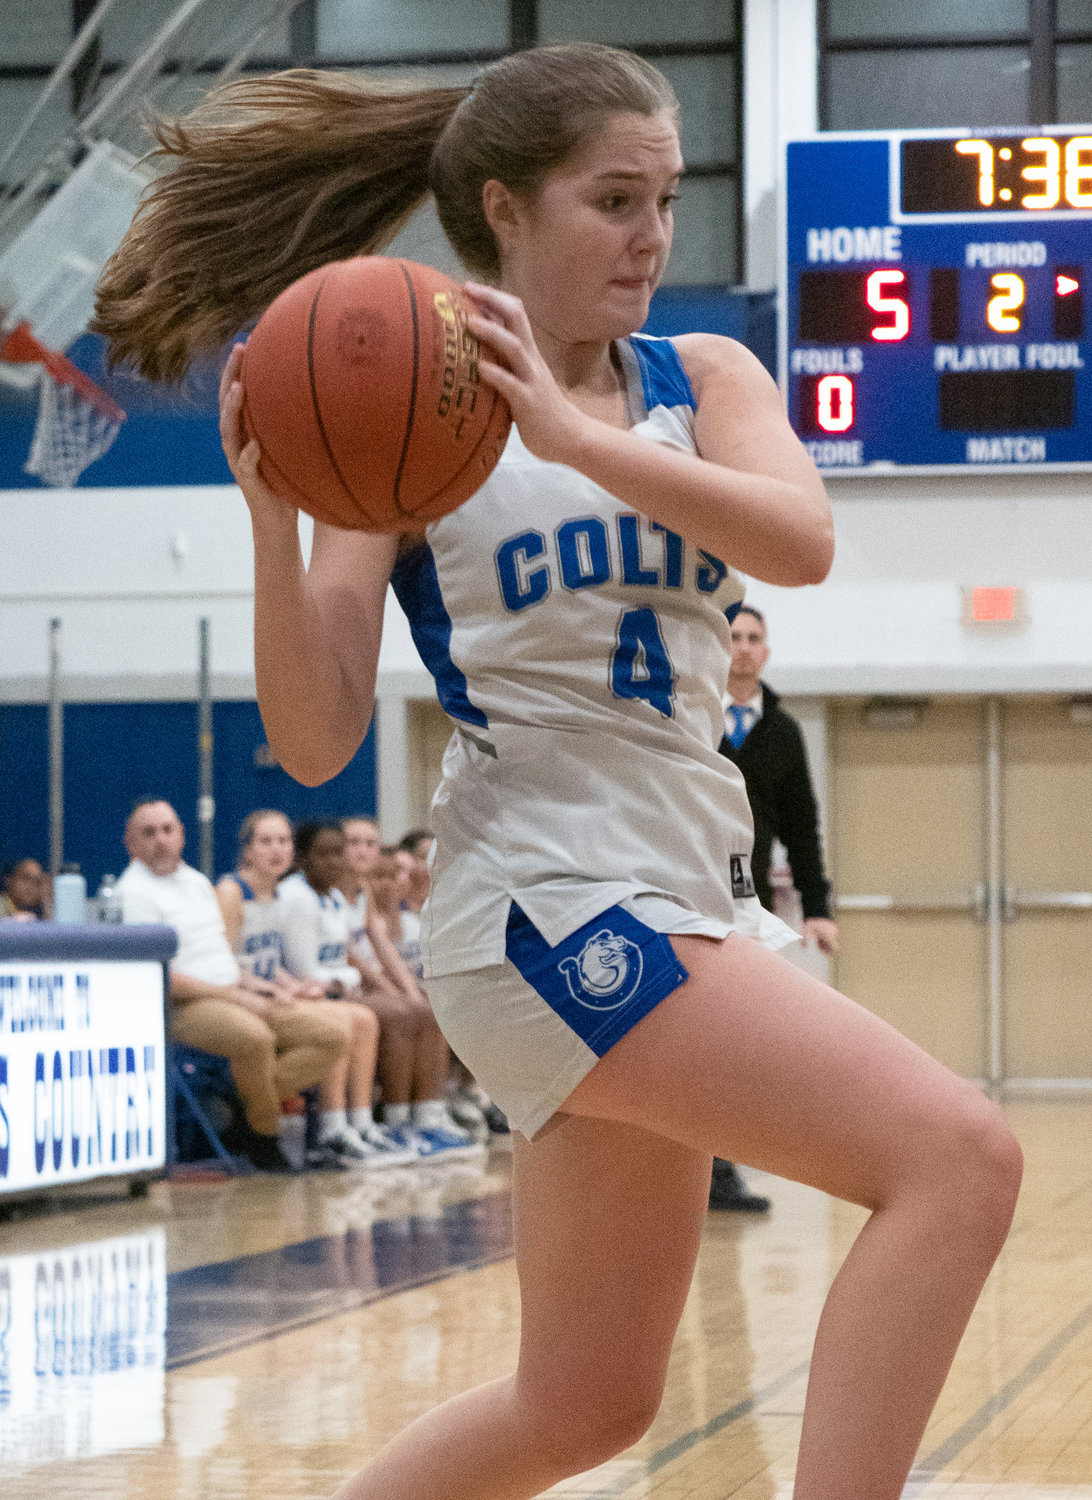 Senior Margaret Casimano is averaging 8.5 points for the Colts, who had only one blemish on their conference record through seven games.